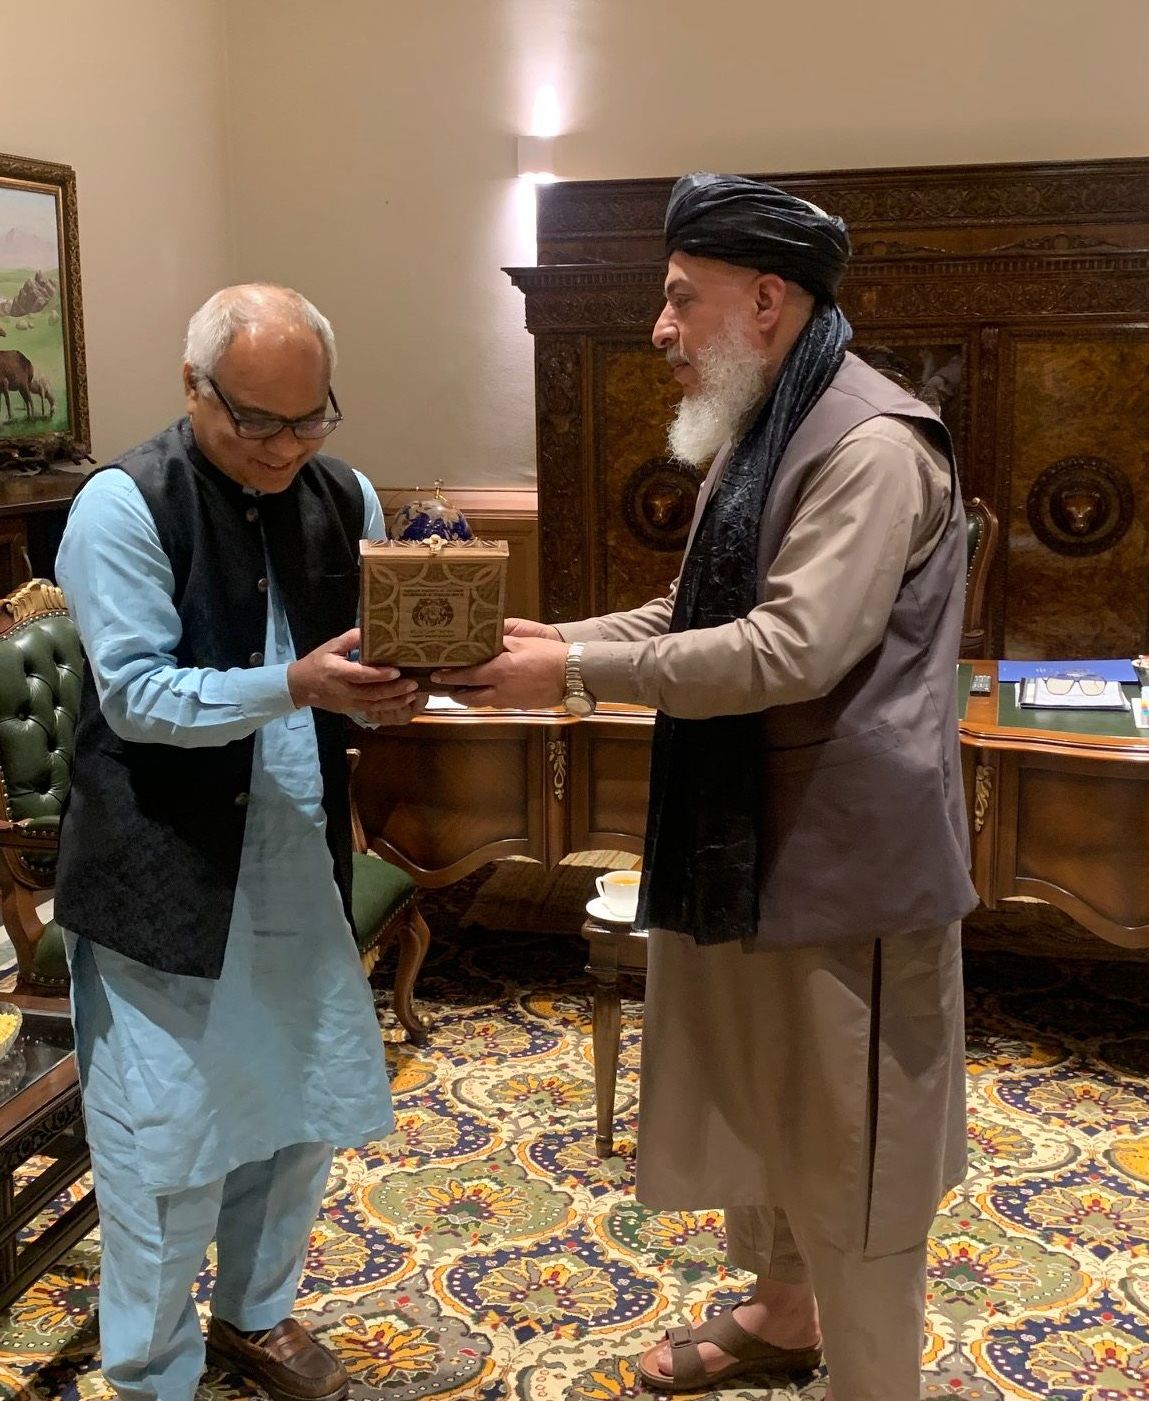 Afghan Deputy Foreign Minister H.E. Sher Mohammad Abbas Stanikzai presenting a gift of a plate of Lapis Lazuli to Kamal Ahmad for AUW as a token of his government